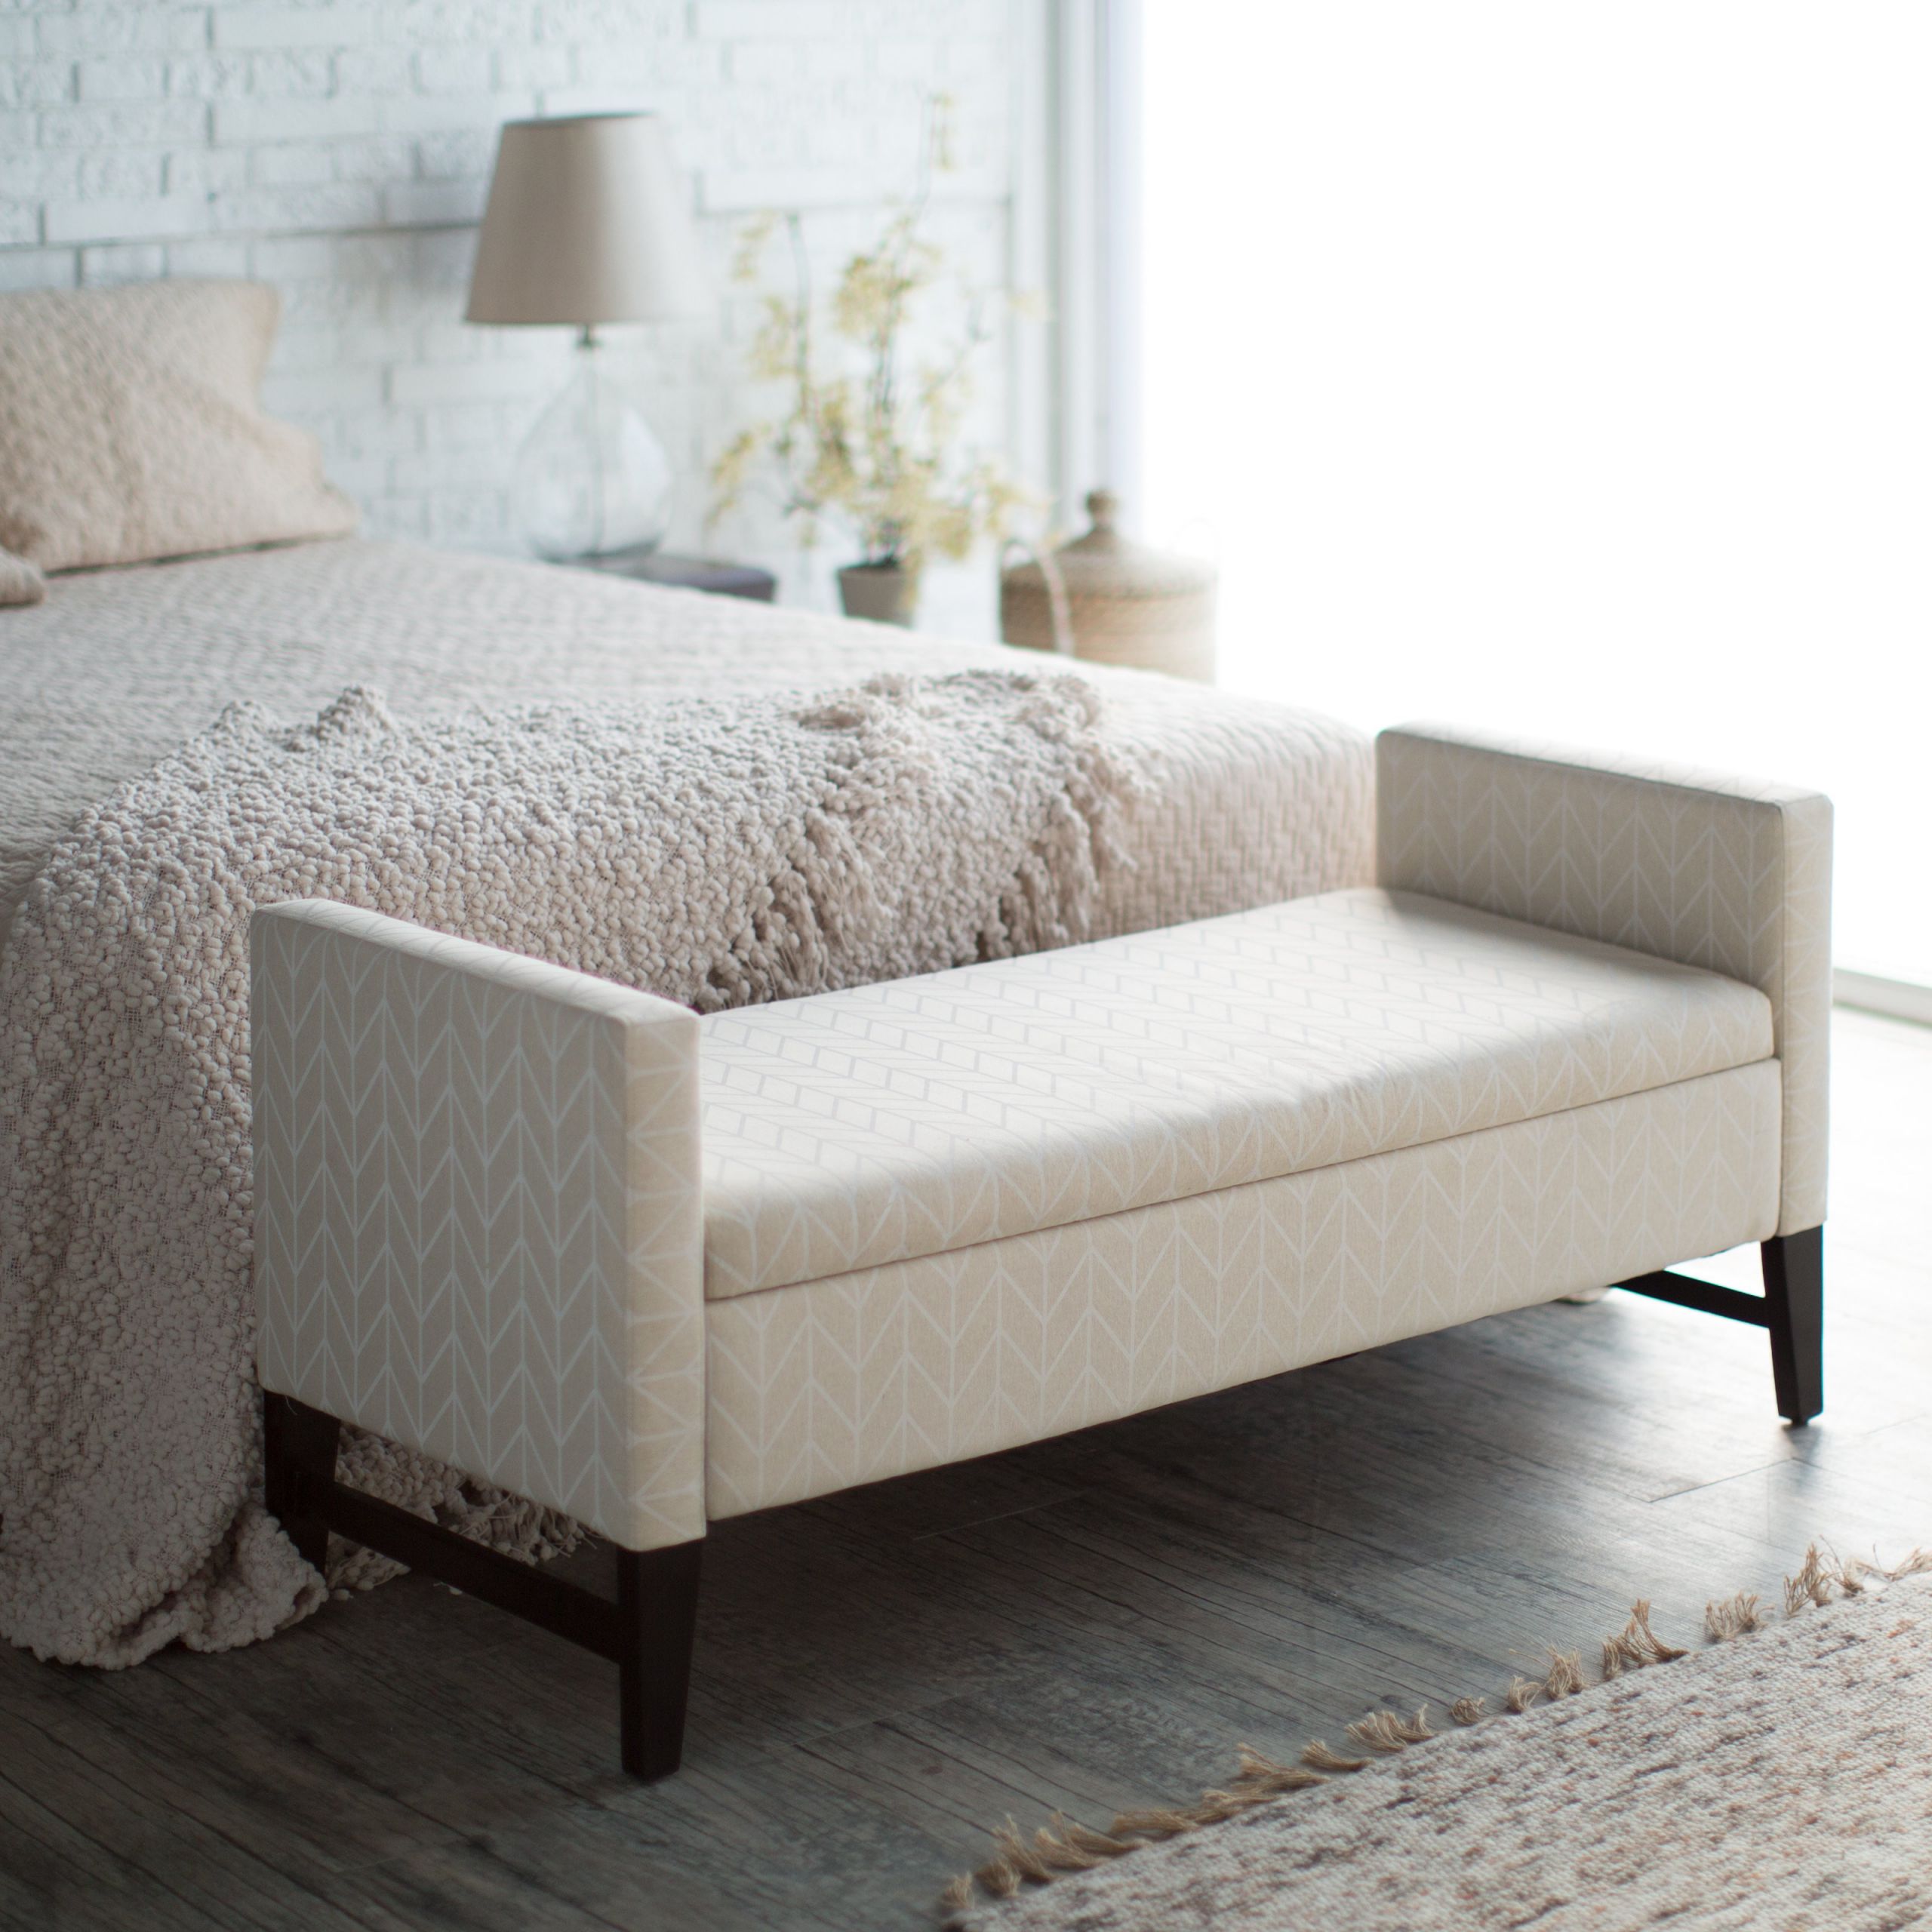 Storage Bench Bedroom
 Add an Extra Seating or Storage to Your Bedroom with an